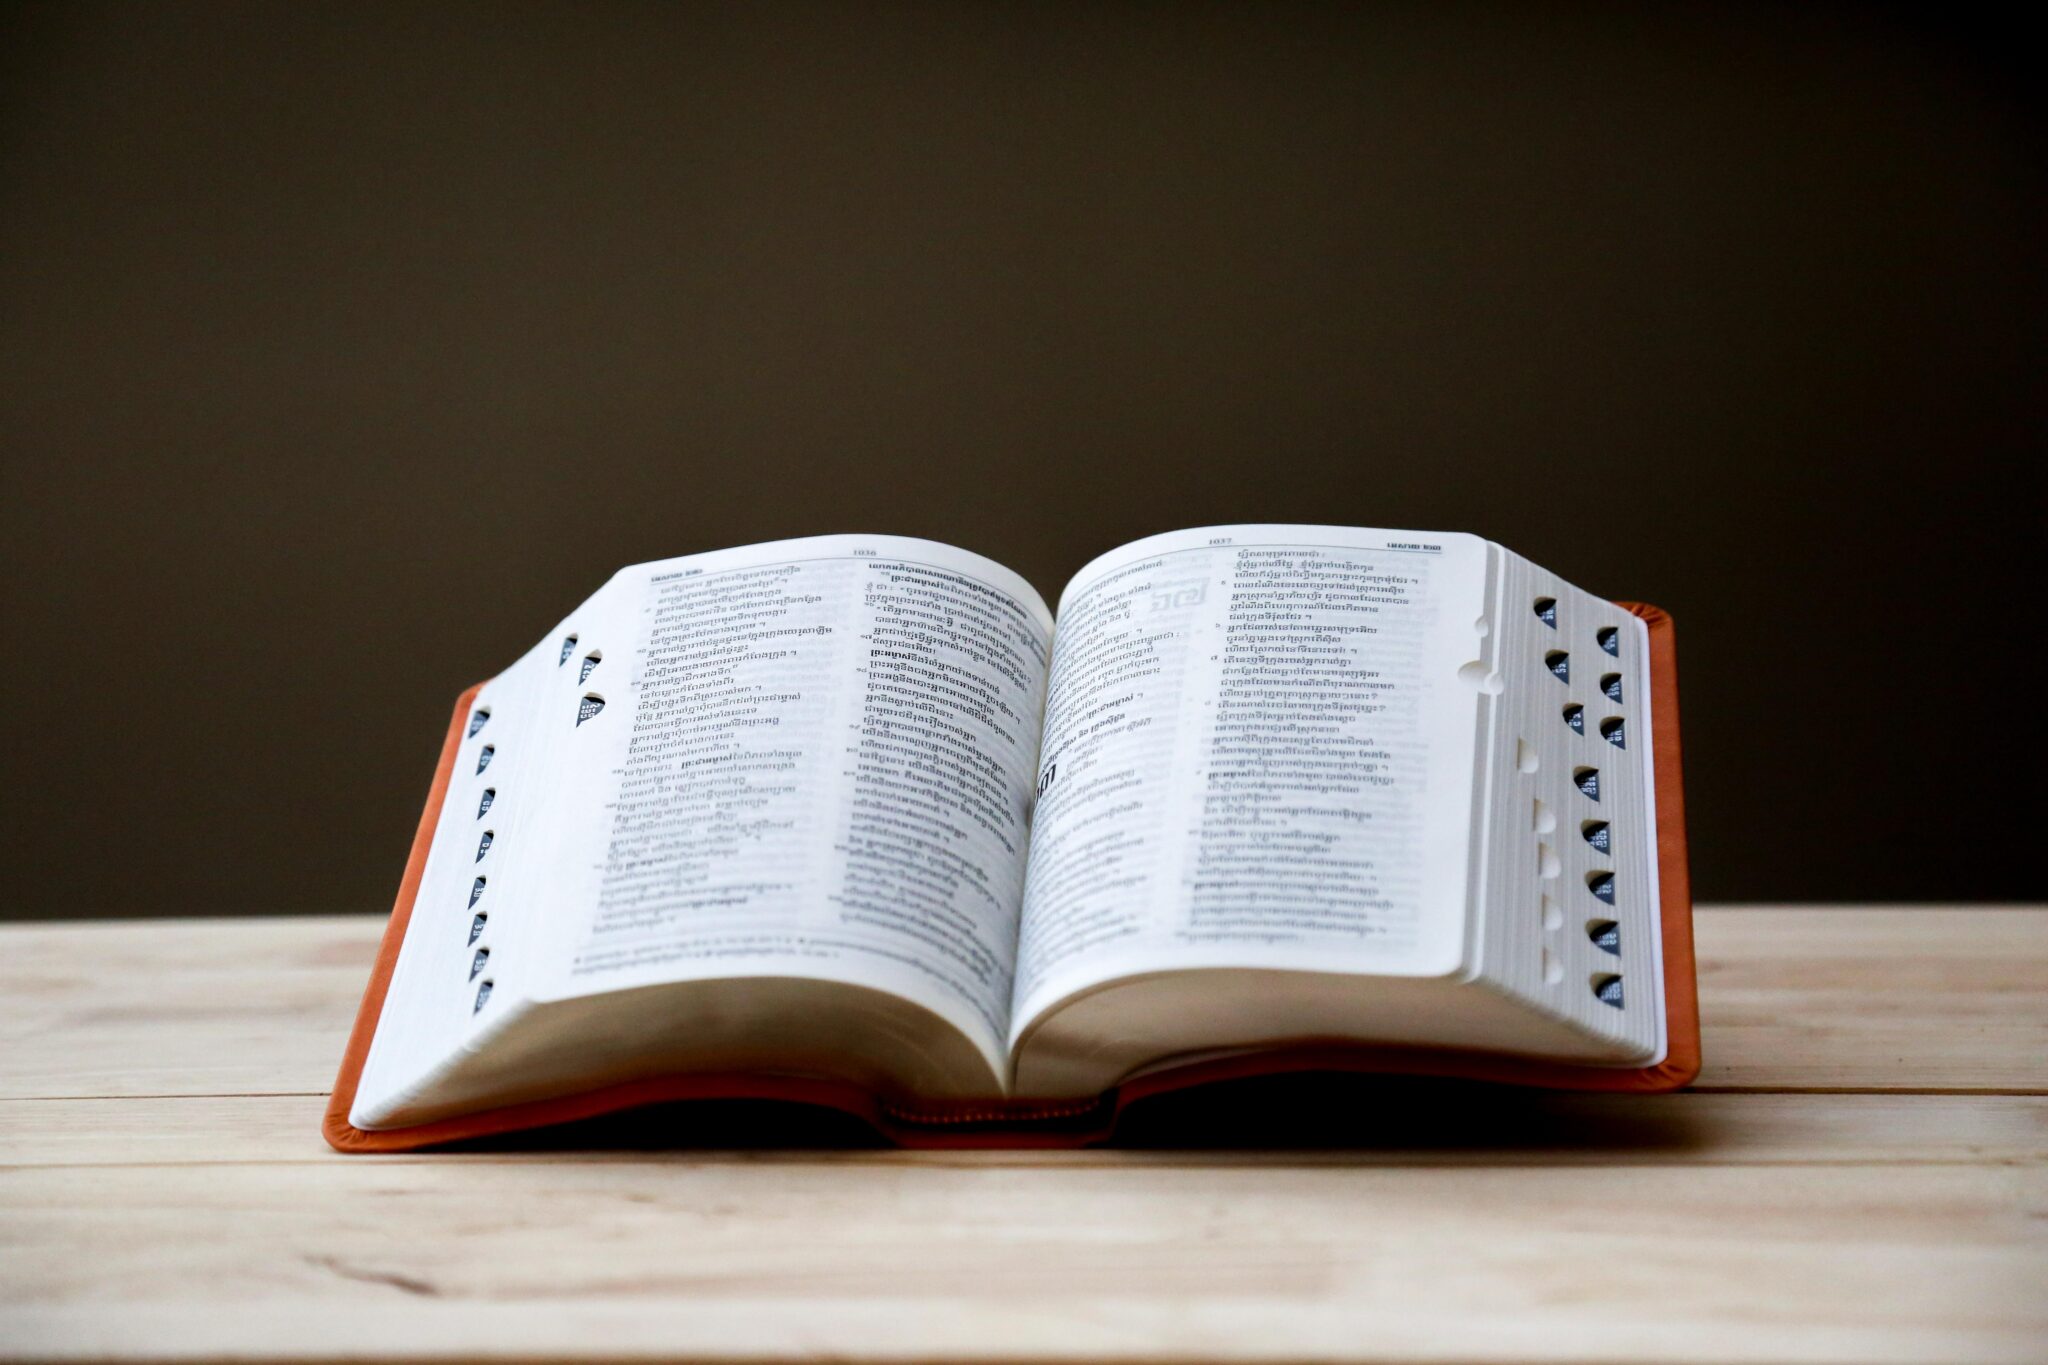 An open dictionary on a table, with a glimpse of a red cover peeking out from the pages.